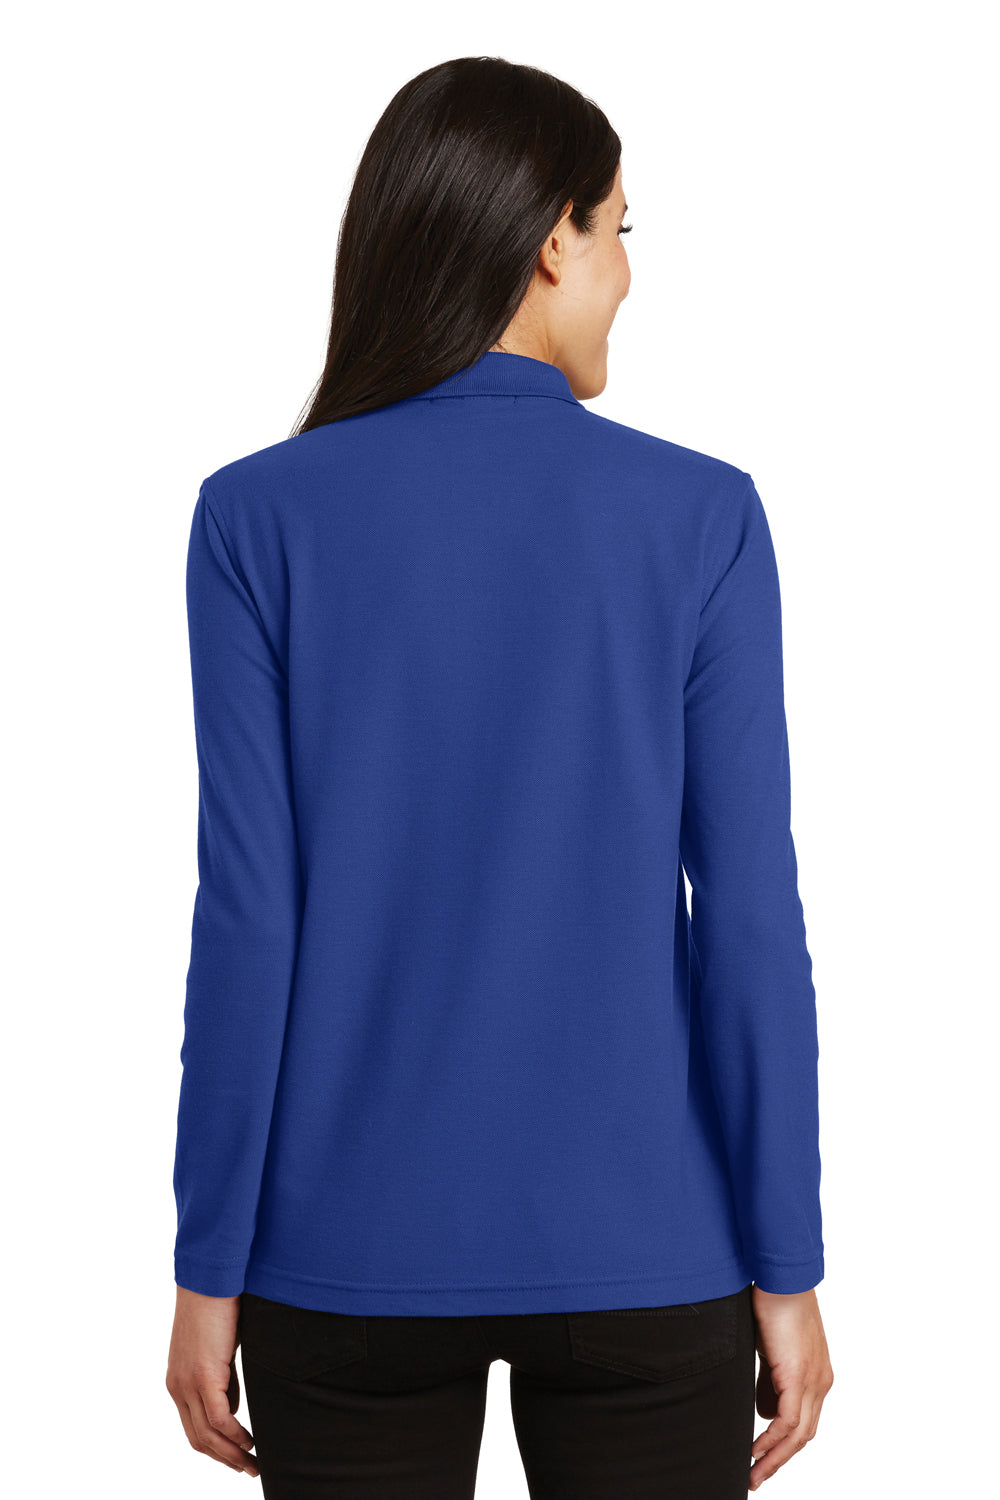 Port Authority L500LS Womens Silk Touch Wrinkle Resistant Long Sleeve Polo Shirt Royal Blue Back